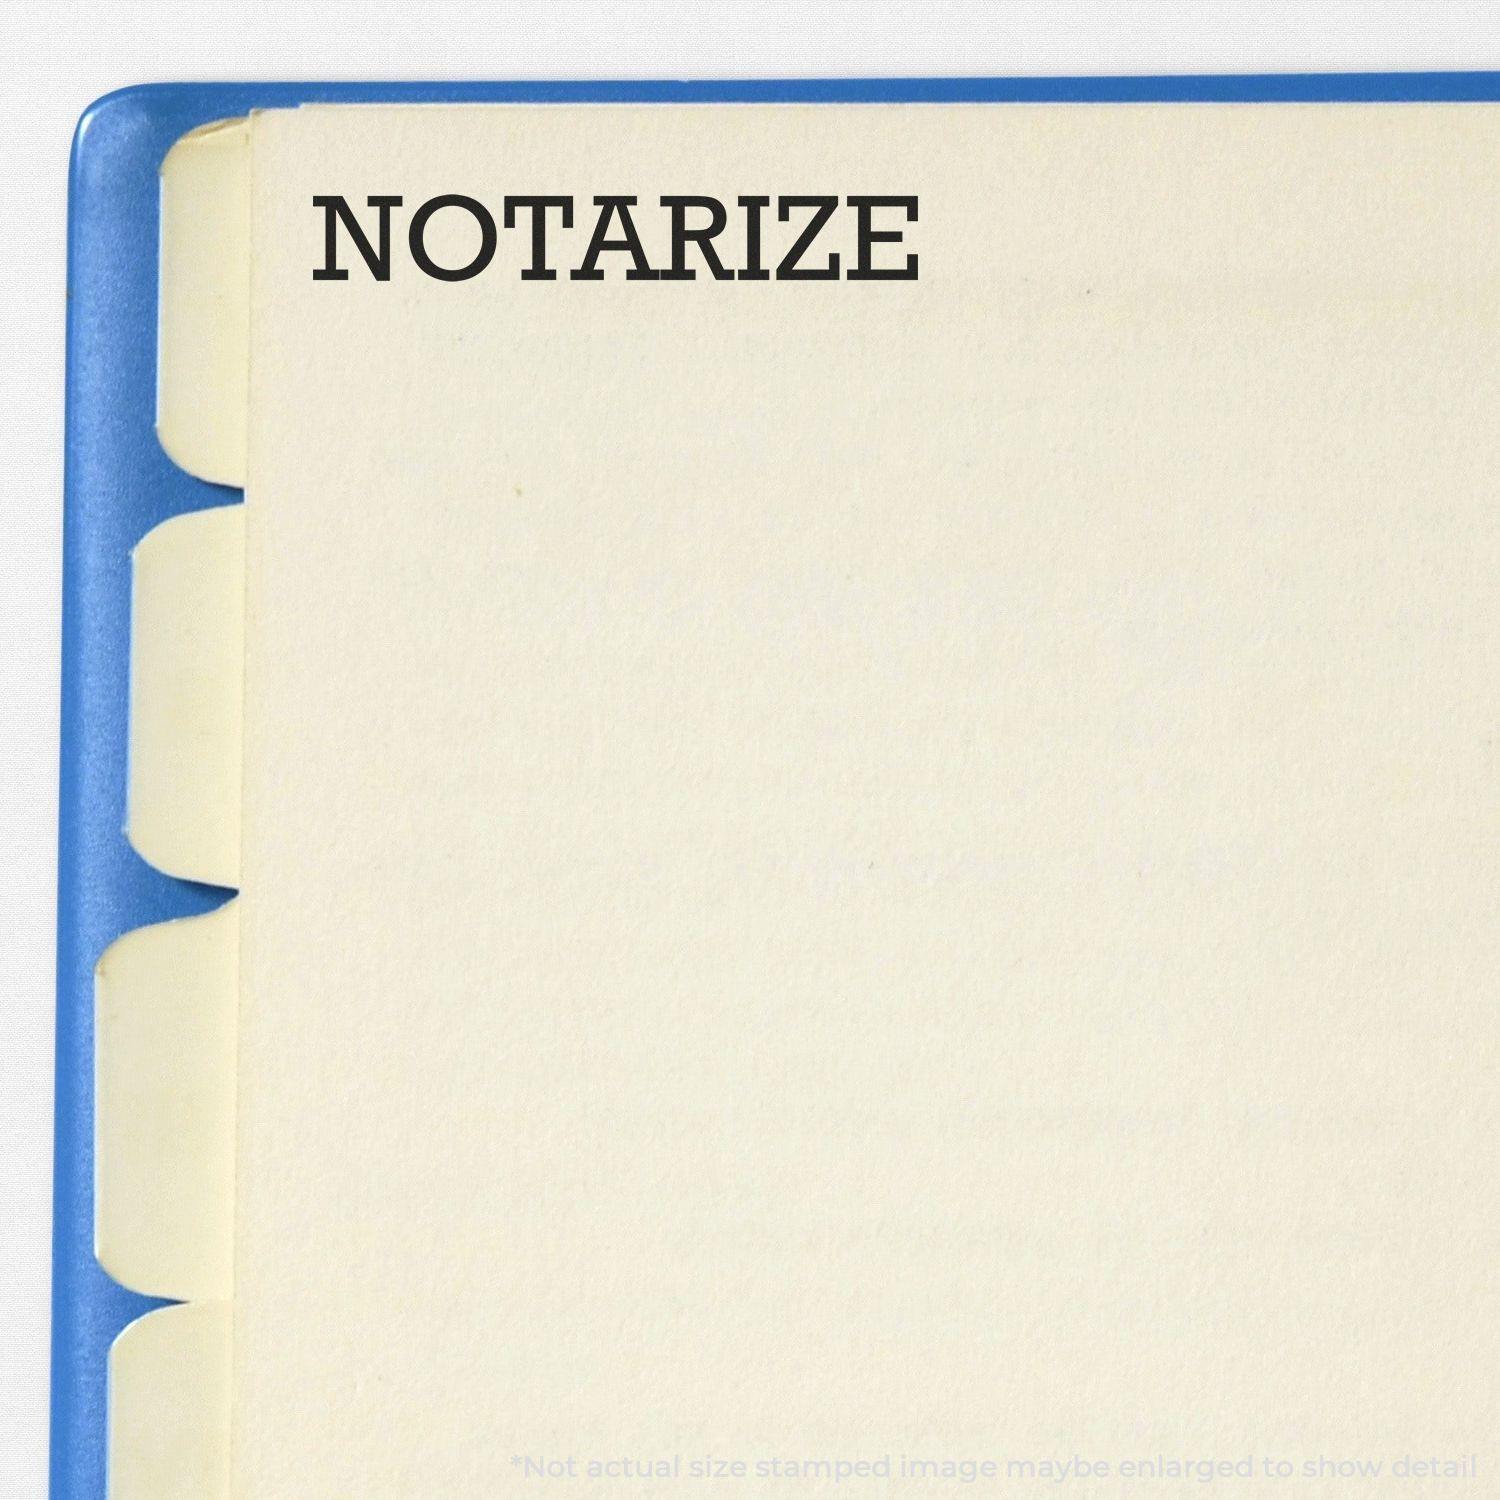 In Use Large Notarize Rubber Stamp Image